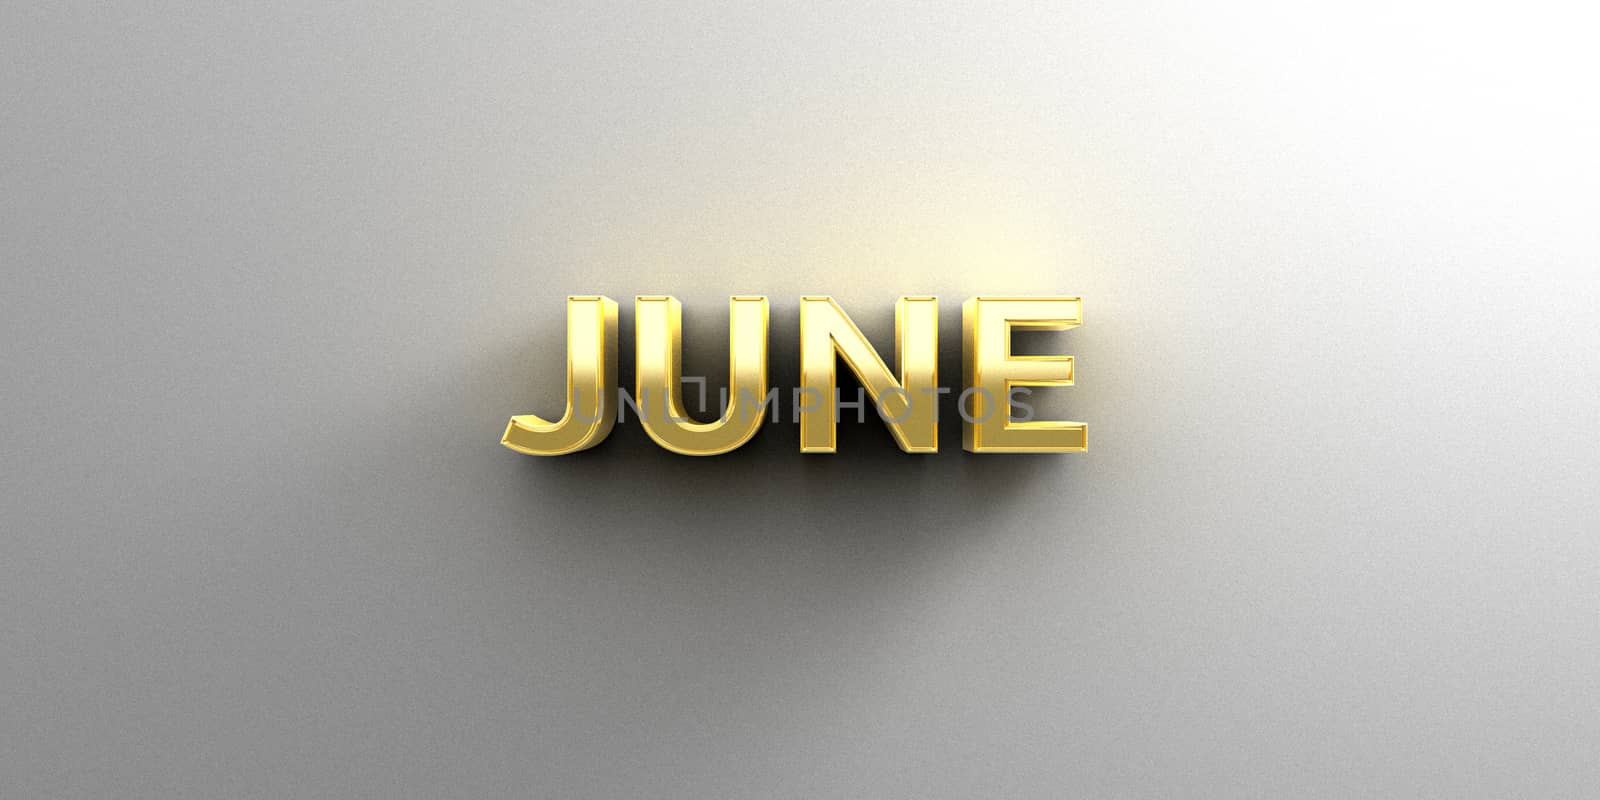 June month gold 3D quality render on the wall background with soft shadow.